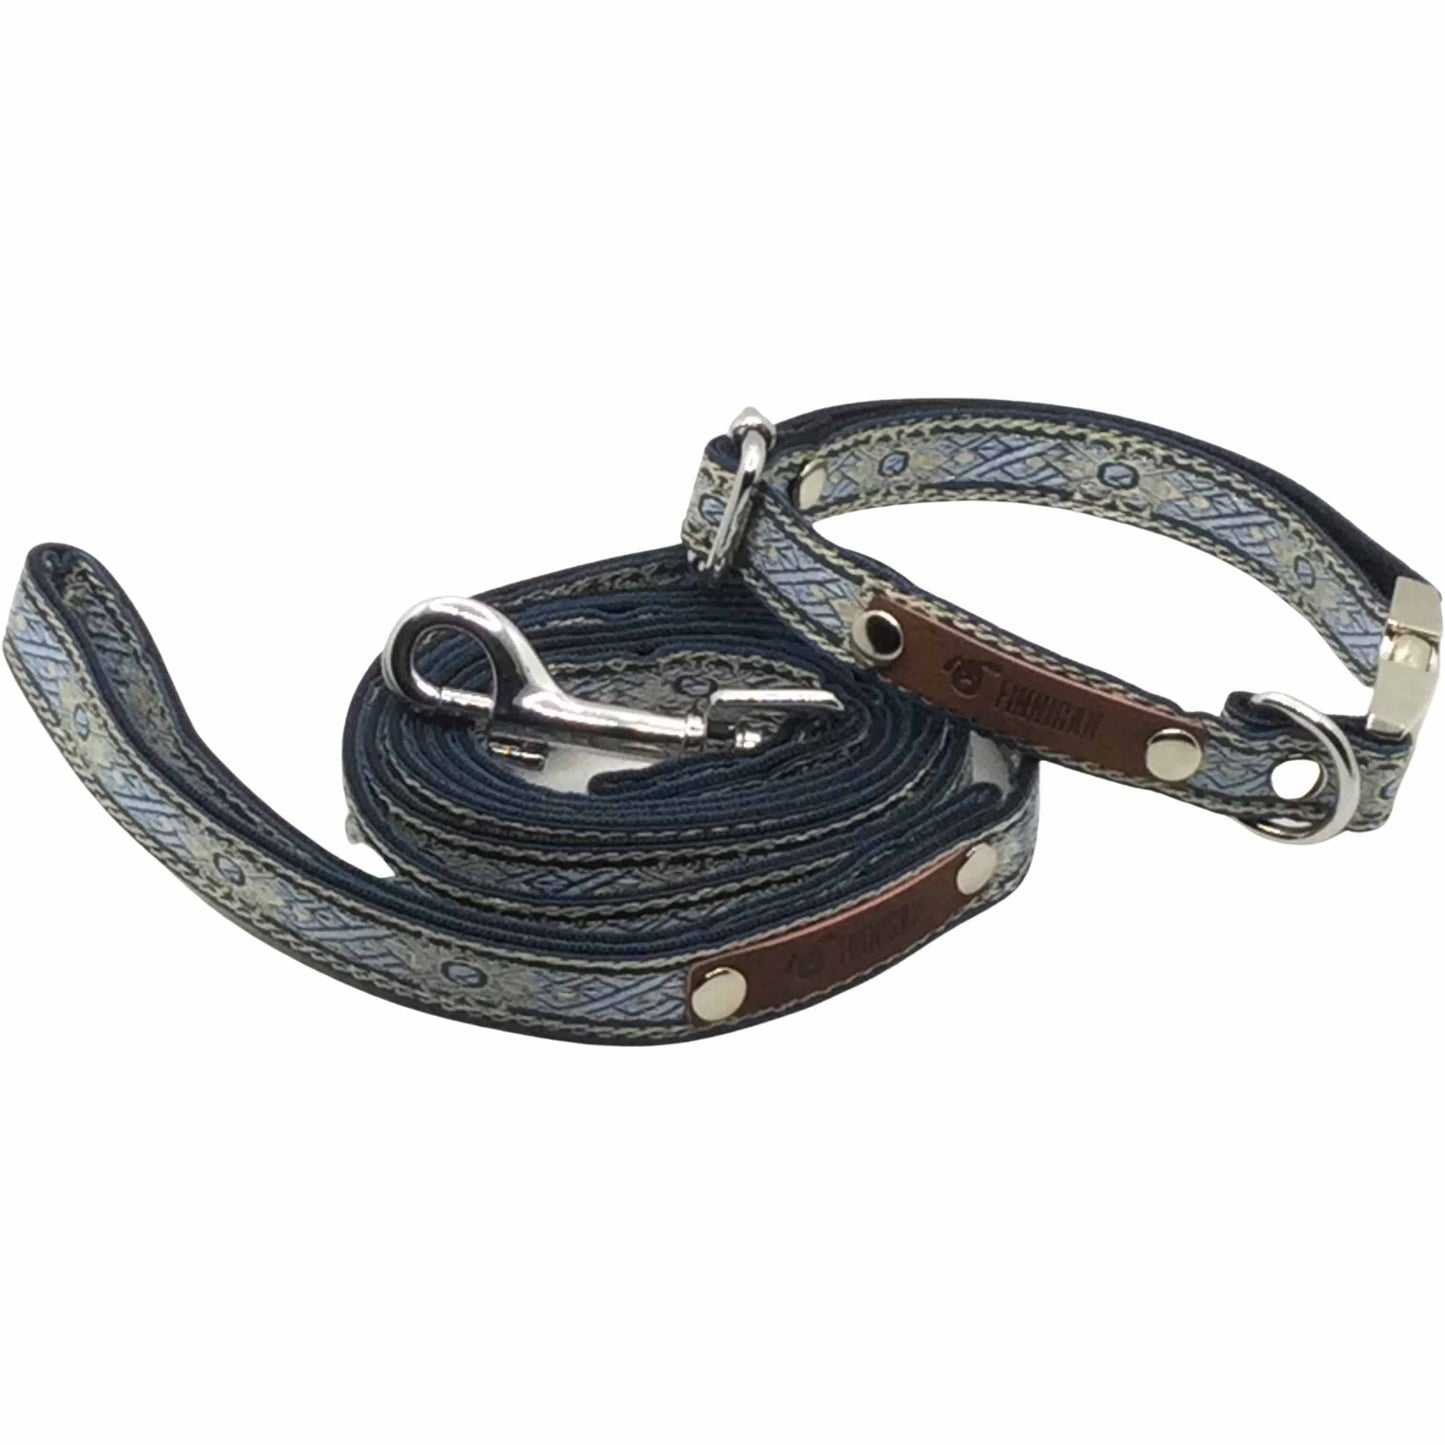 " The Archie" Durable Designer Dog Lead No. 5s